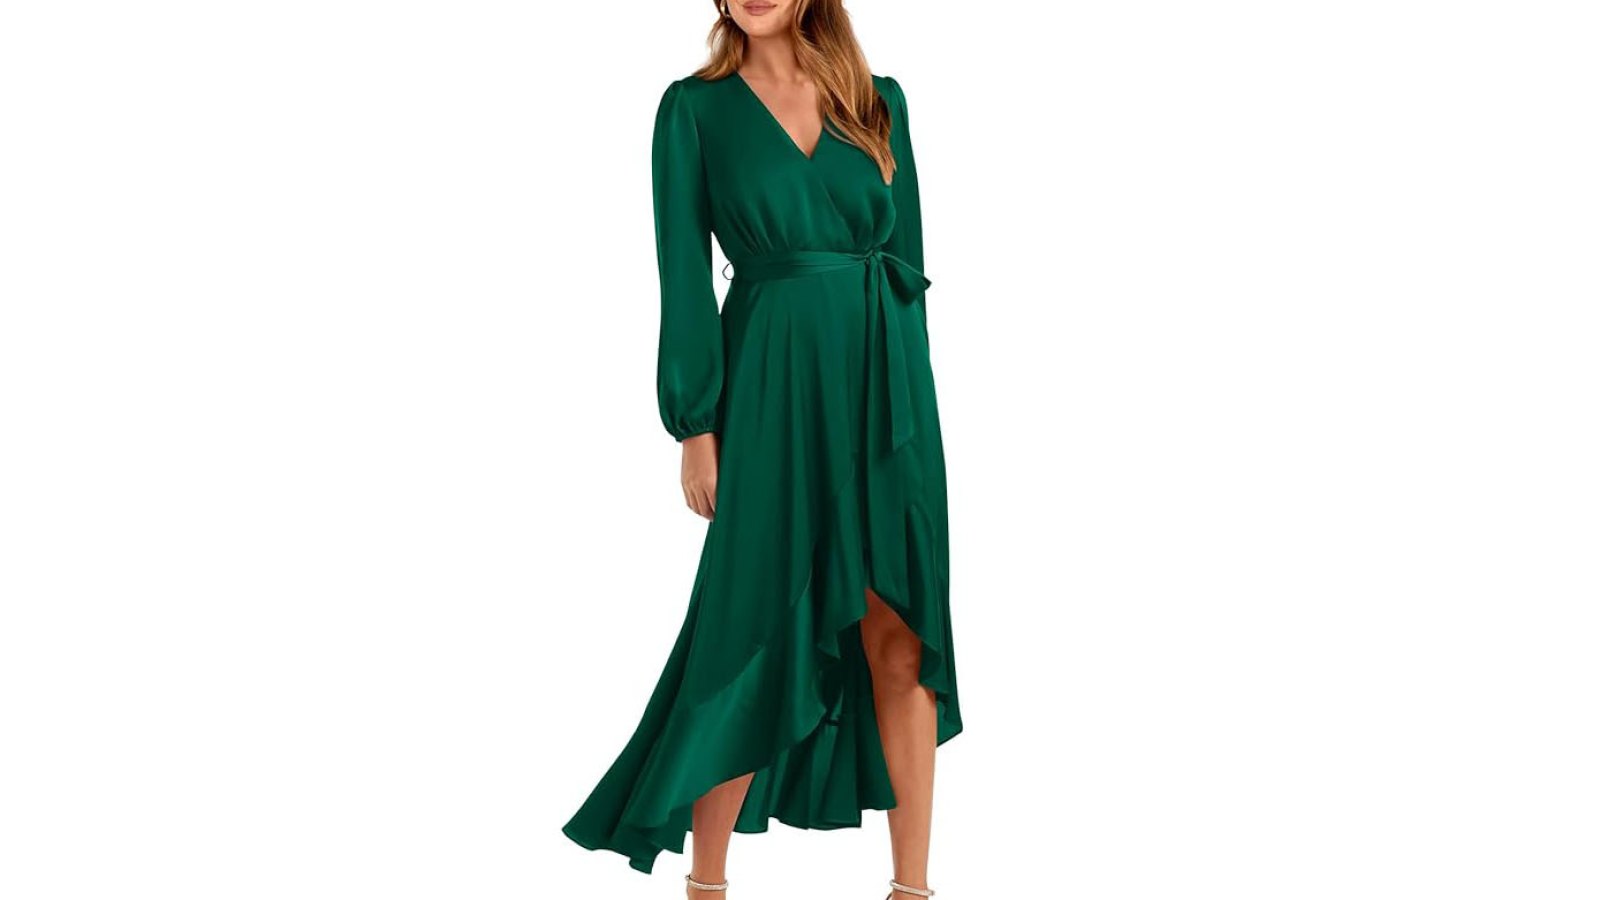 17 Festive Holiday Dresses to Accentuate Pear-Shaped Bodies